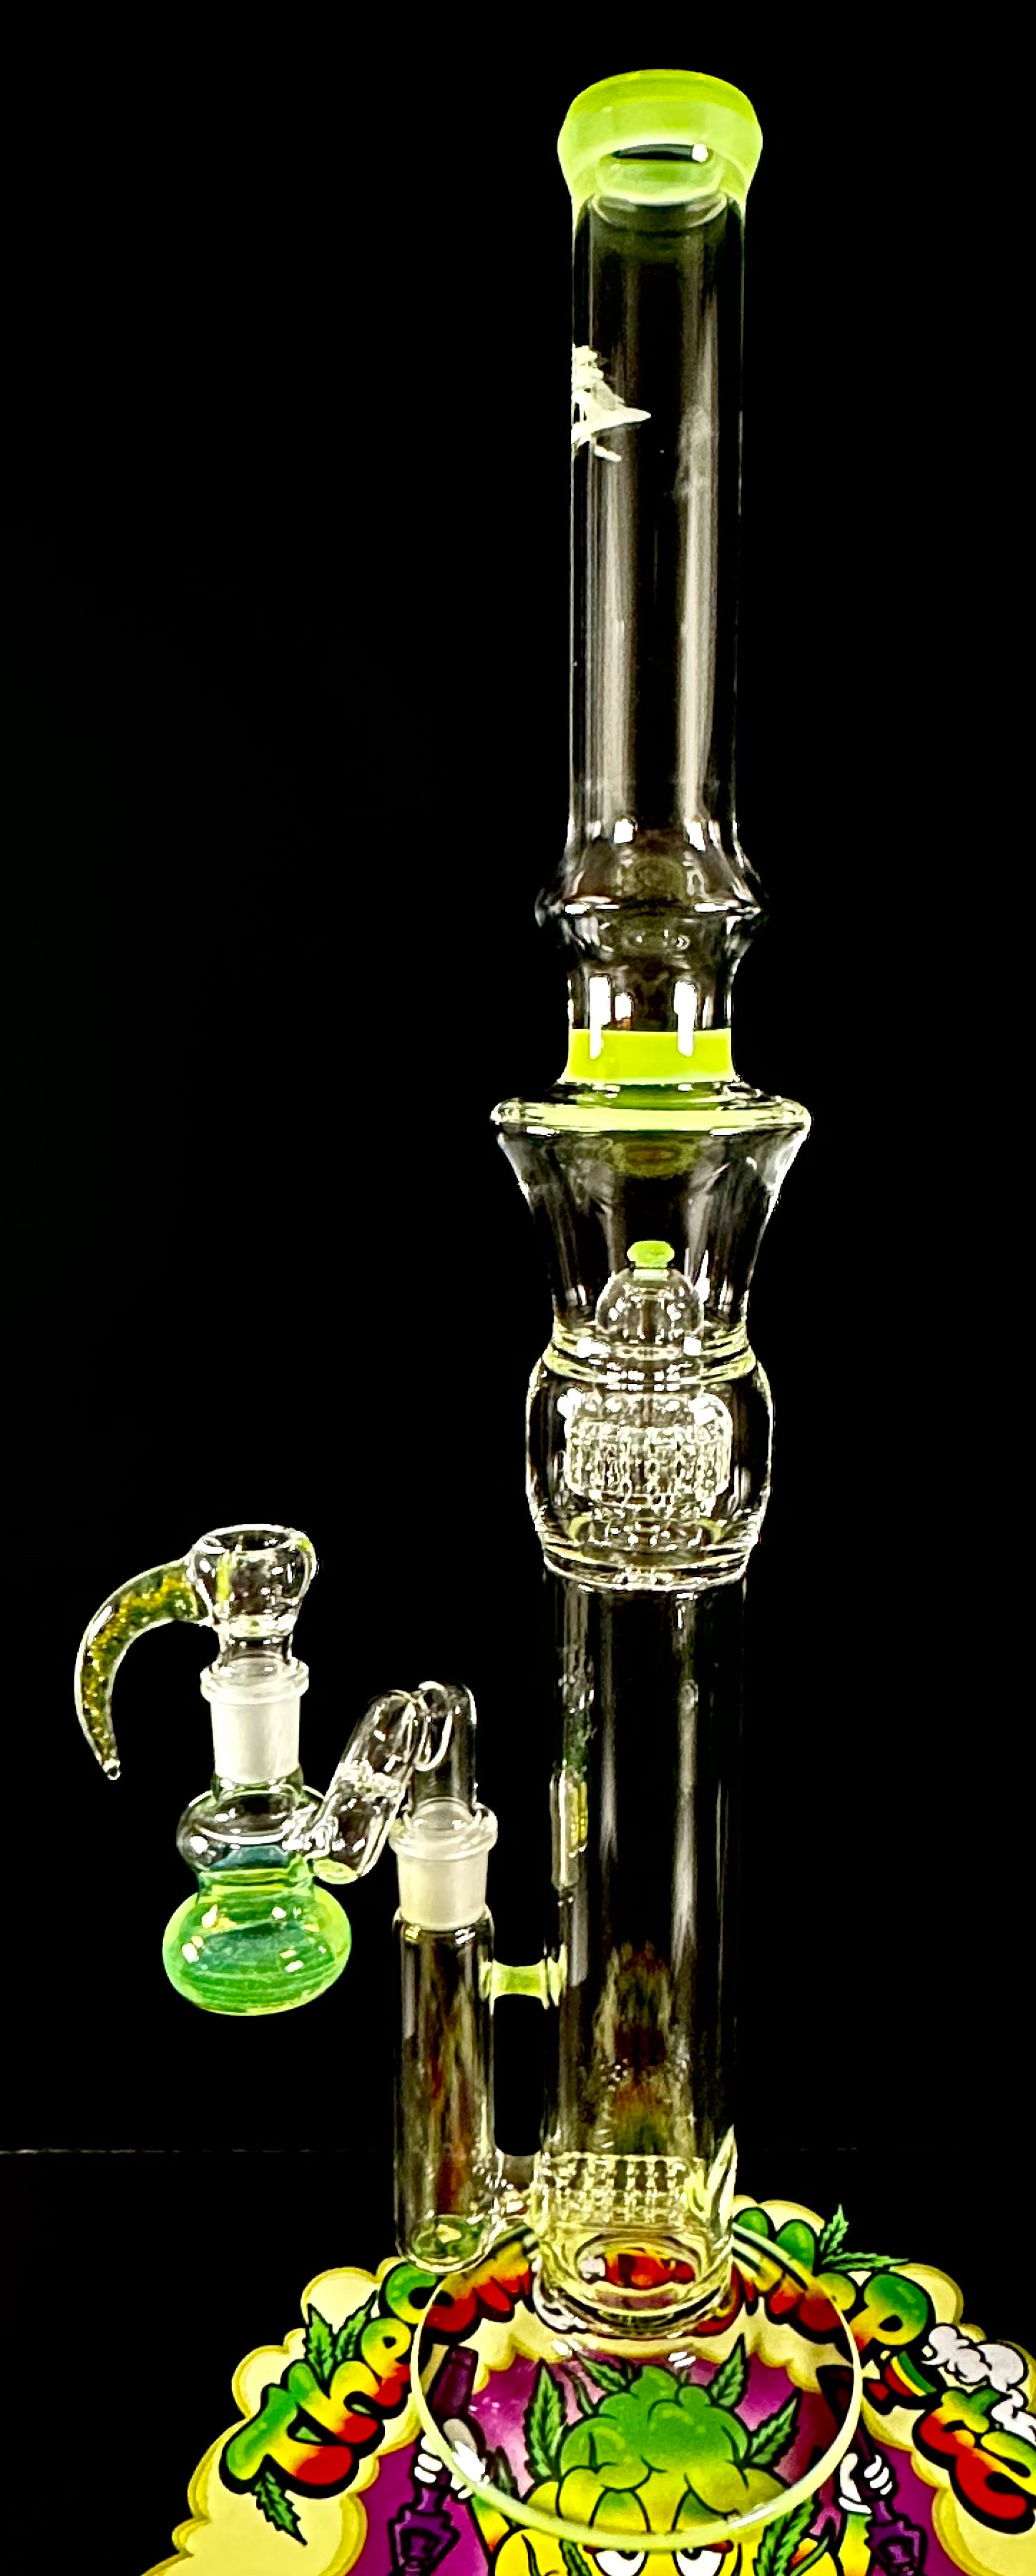 5_3lements Glass Slyme Grid to Full with Ash Catcher